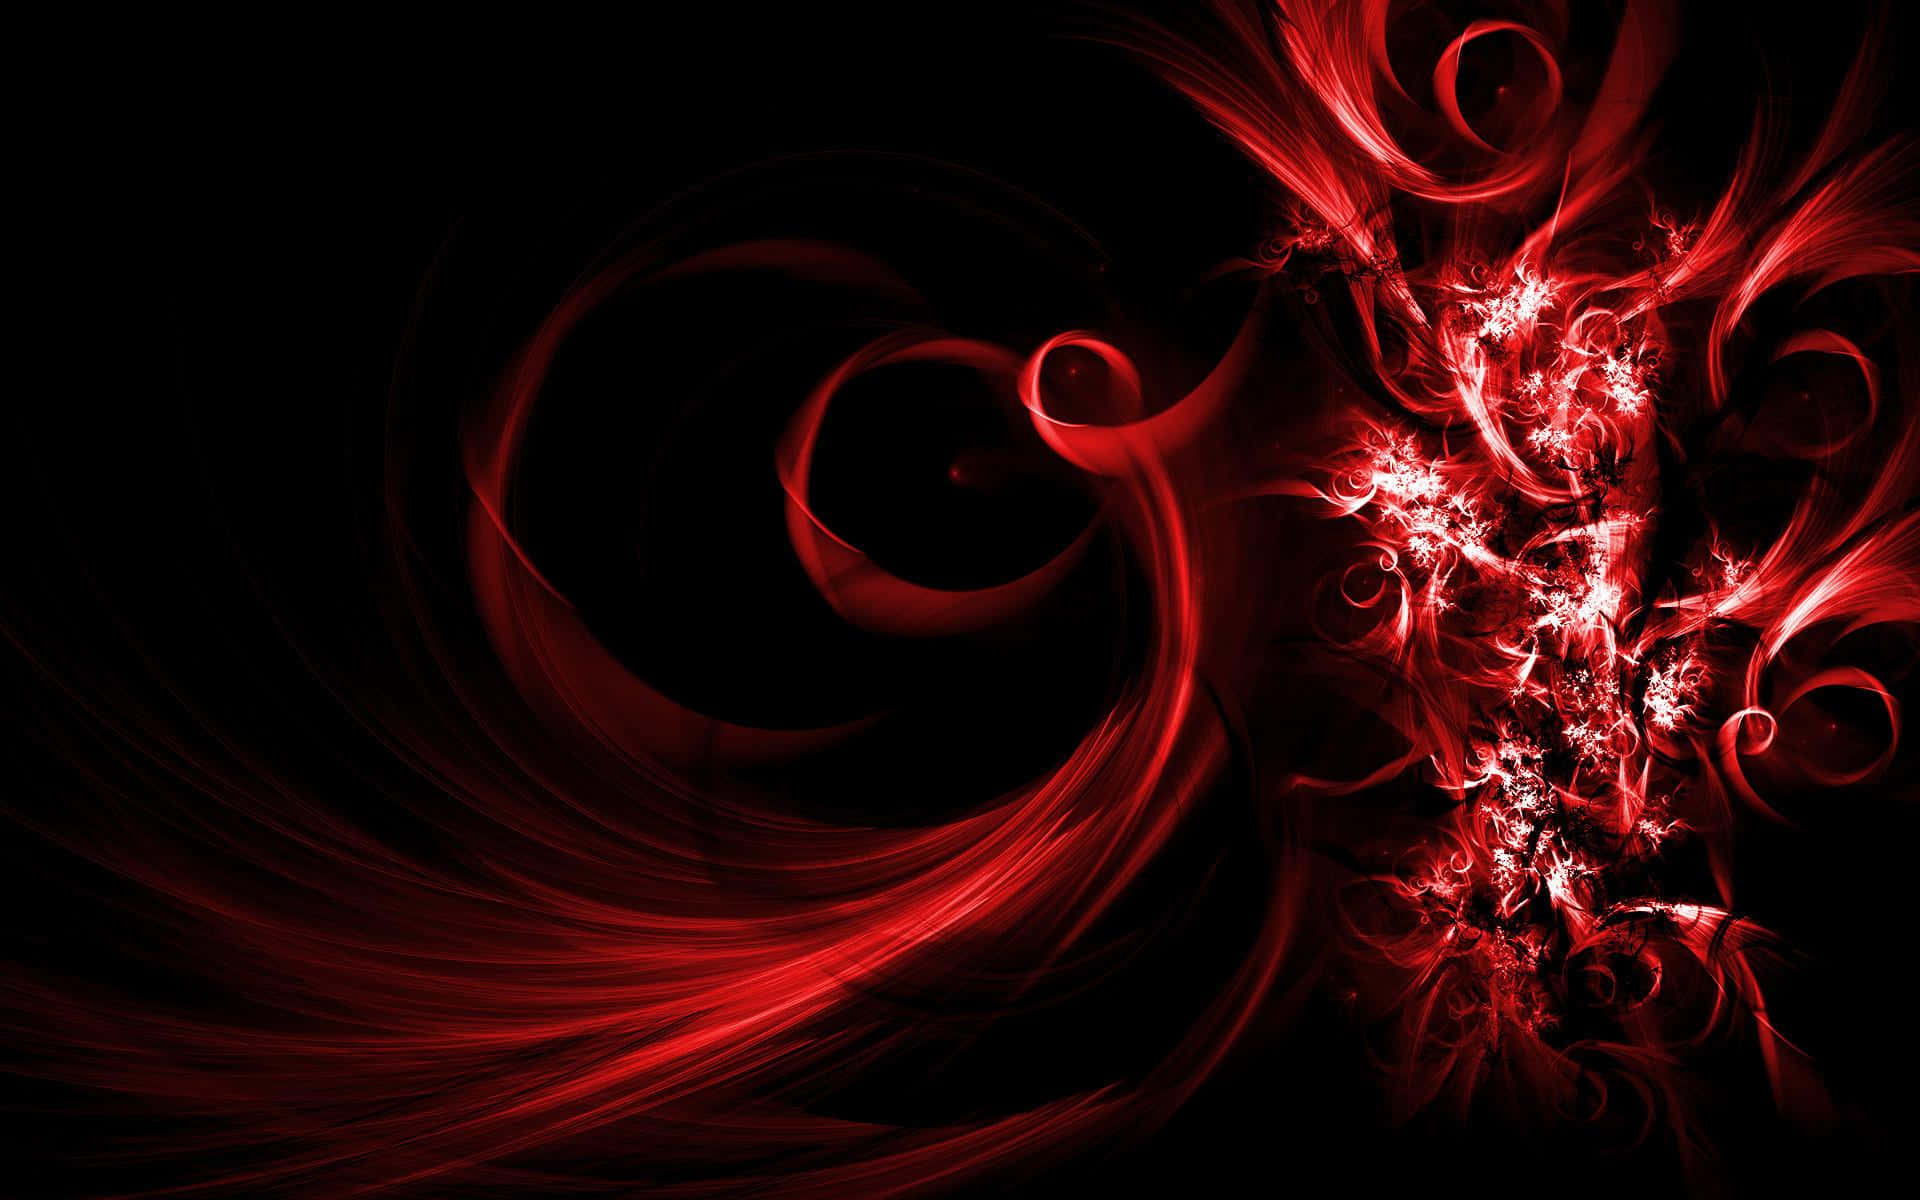 A Red Abstract Background With Swirls And Swirls Wallpaper